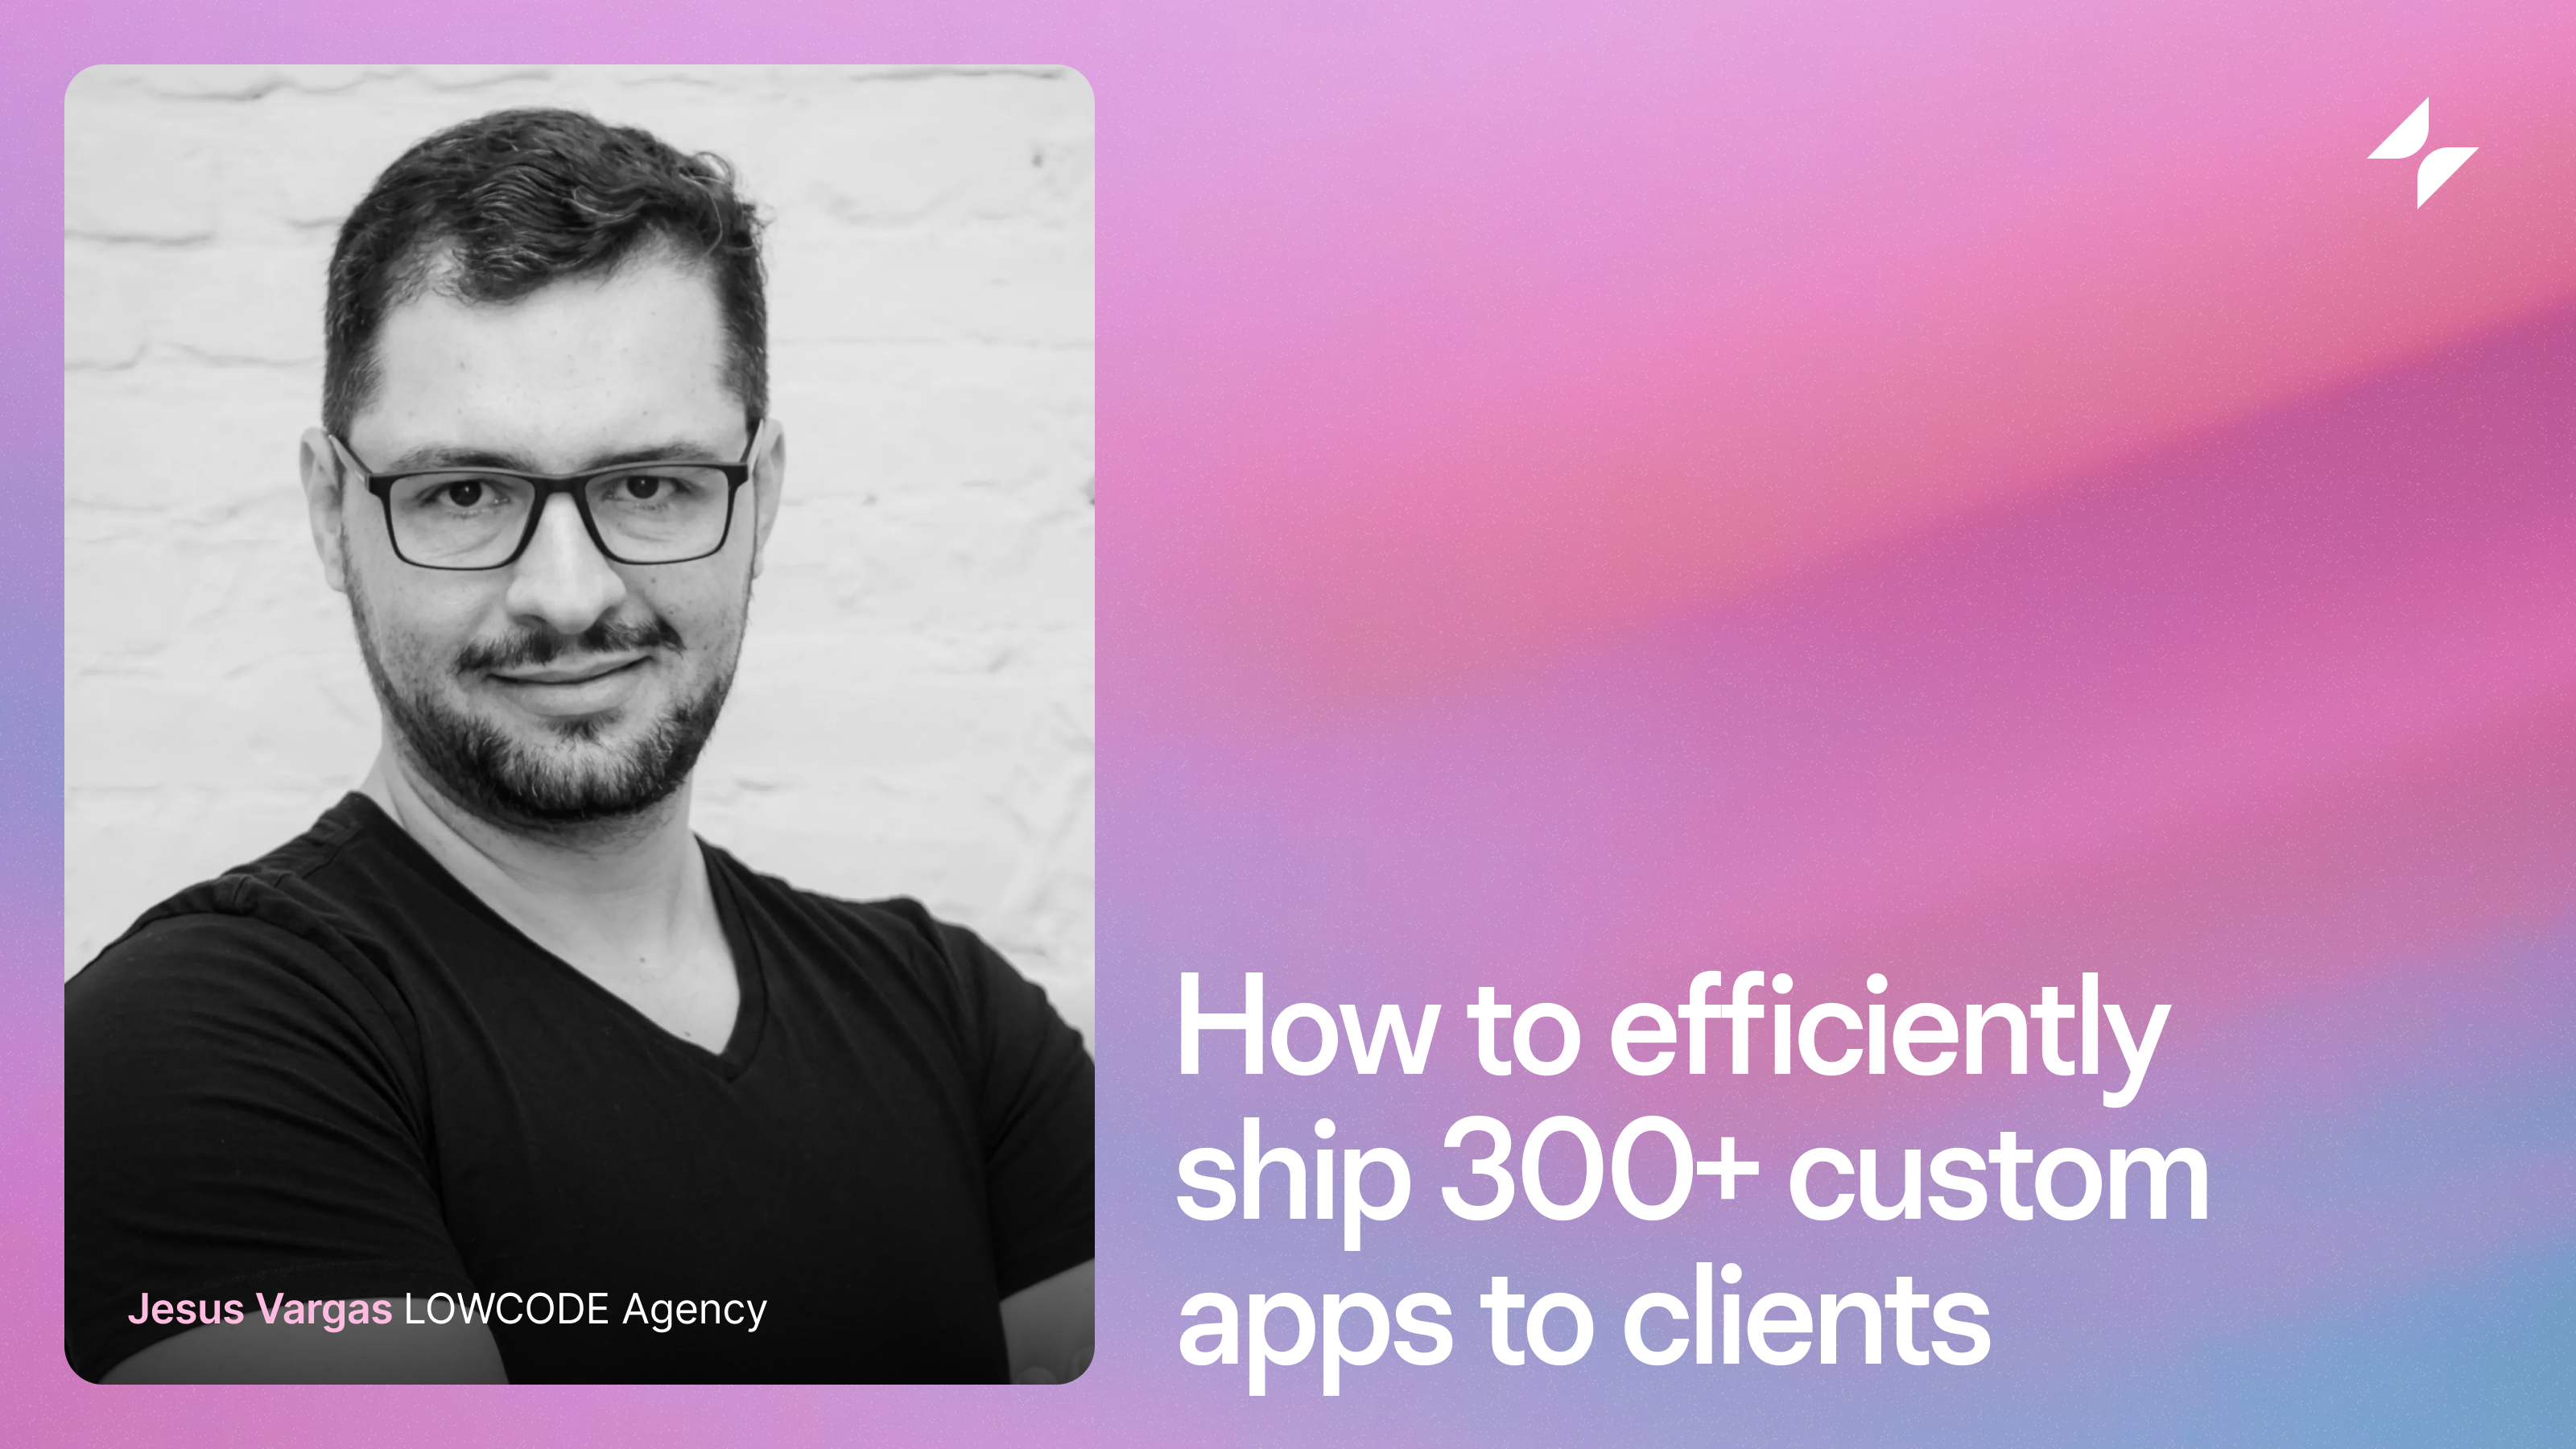 How to efficiently ship 300+ custom apps to clients